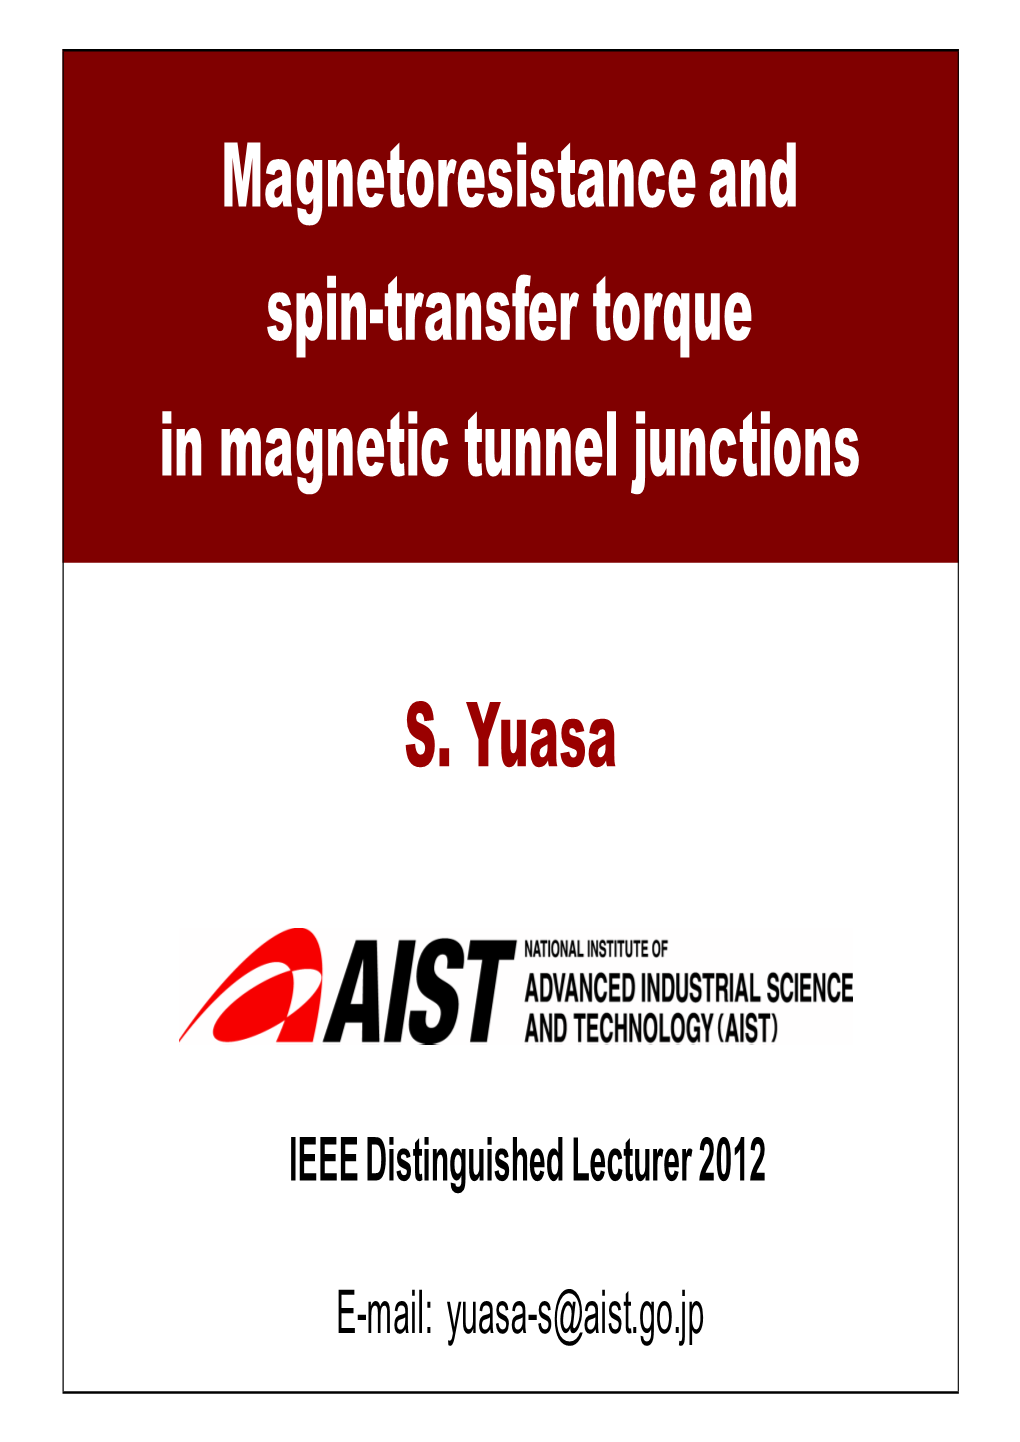 Magnetoresistance and Spin-Transfer Torque in Magnetic Tunnel Junctions